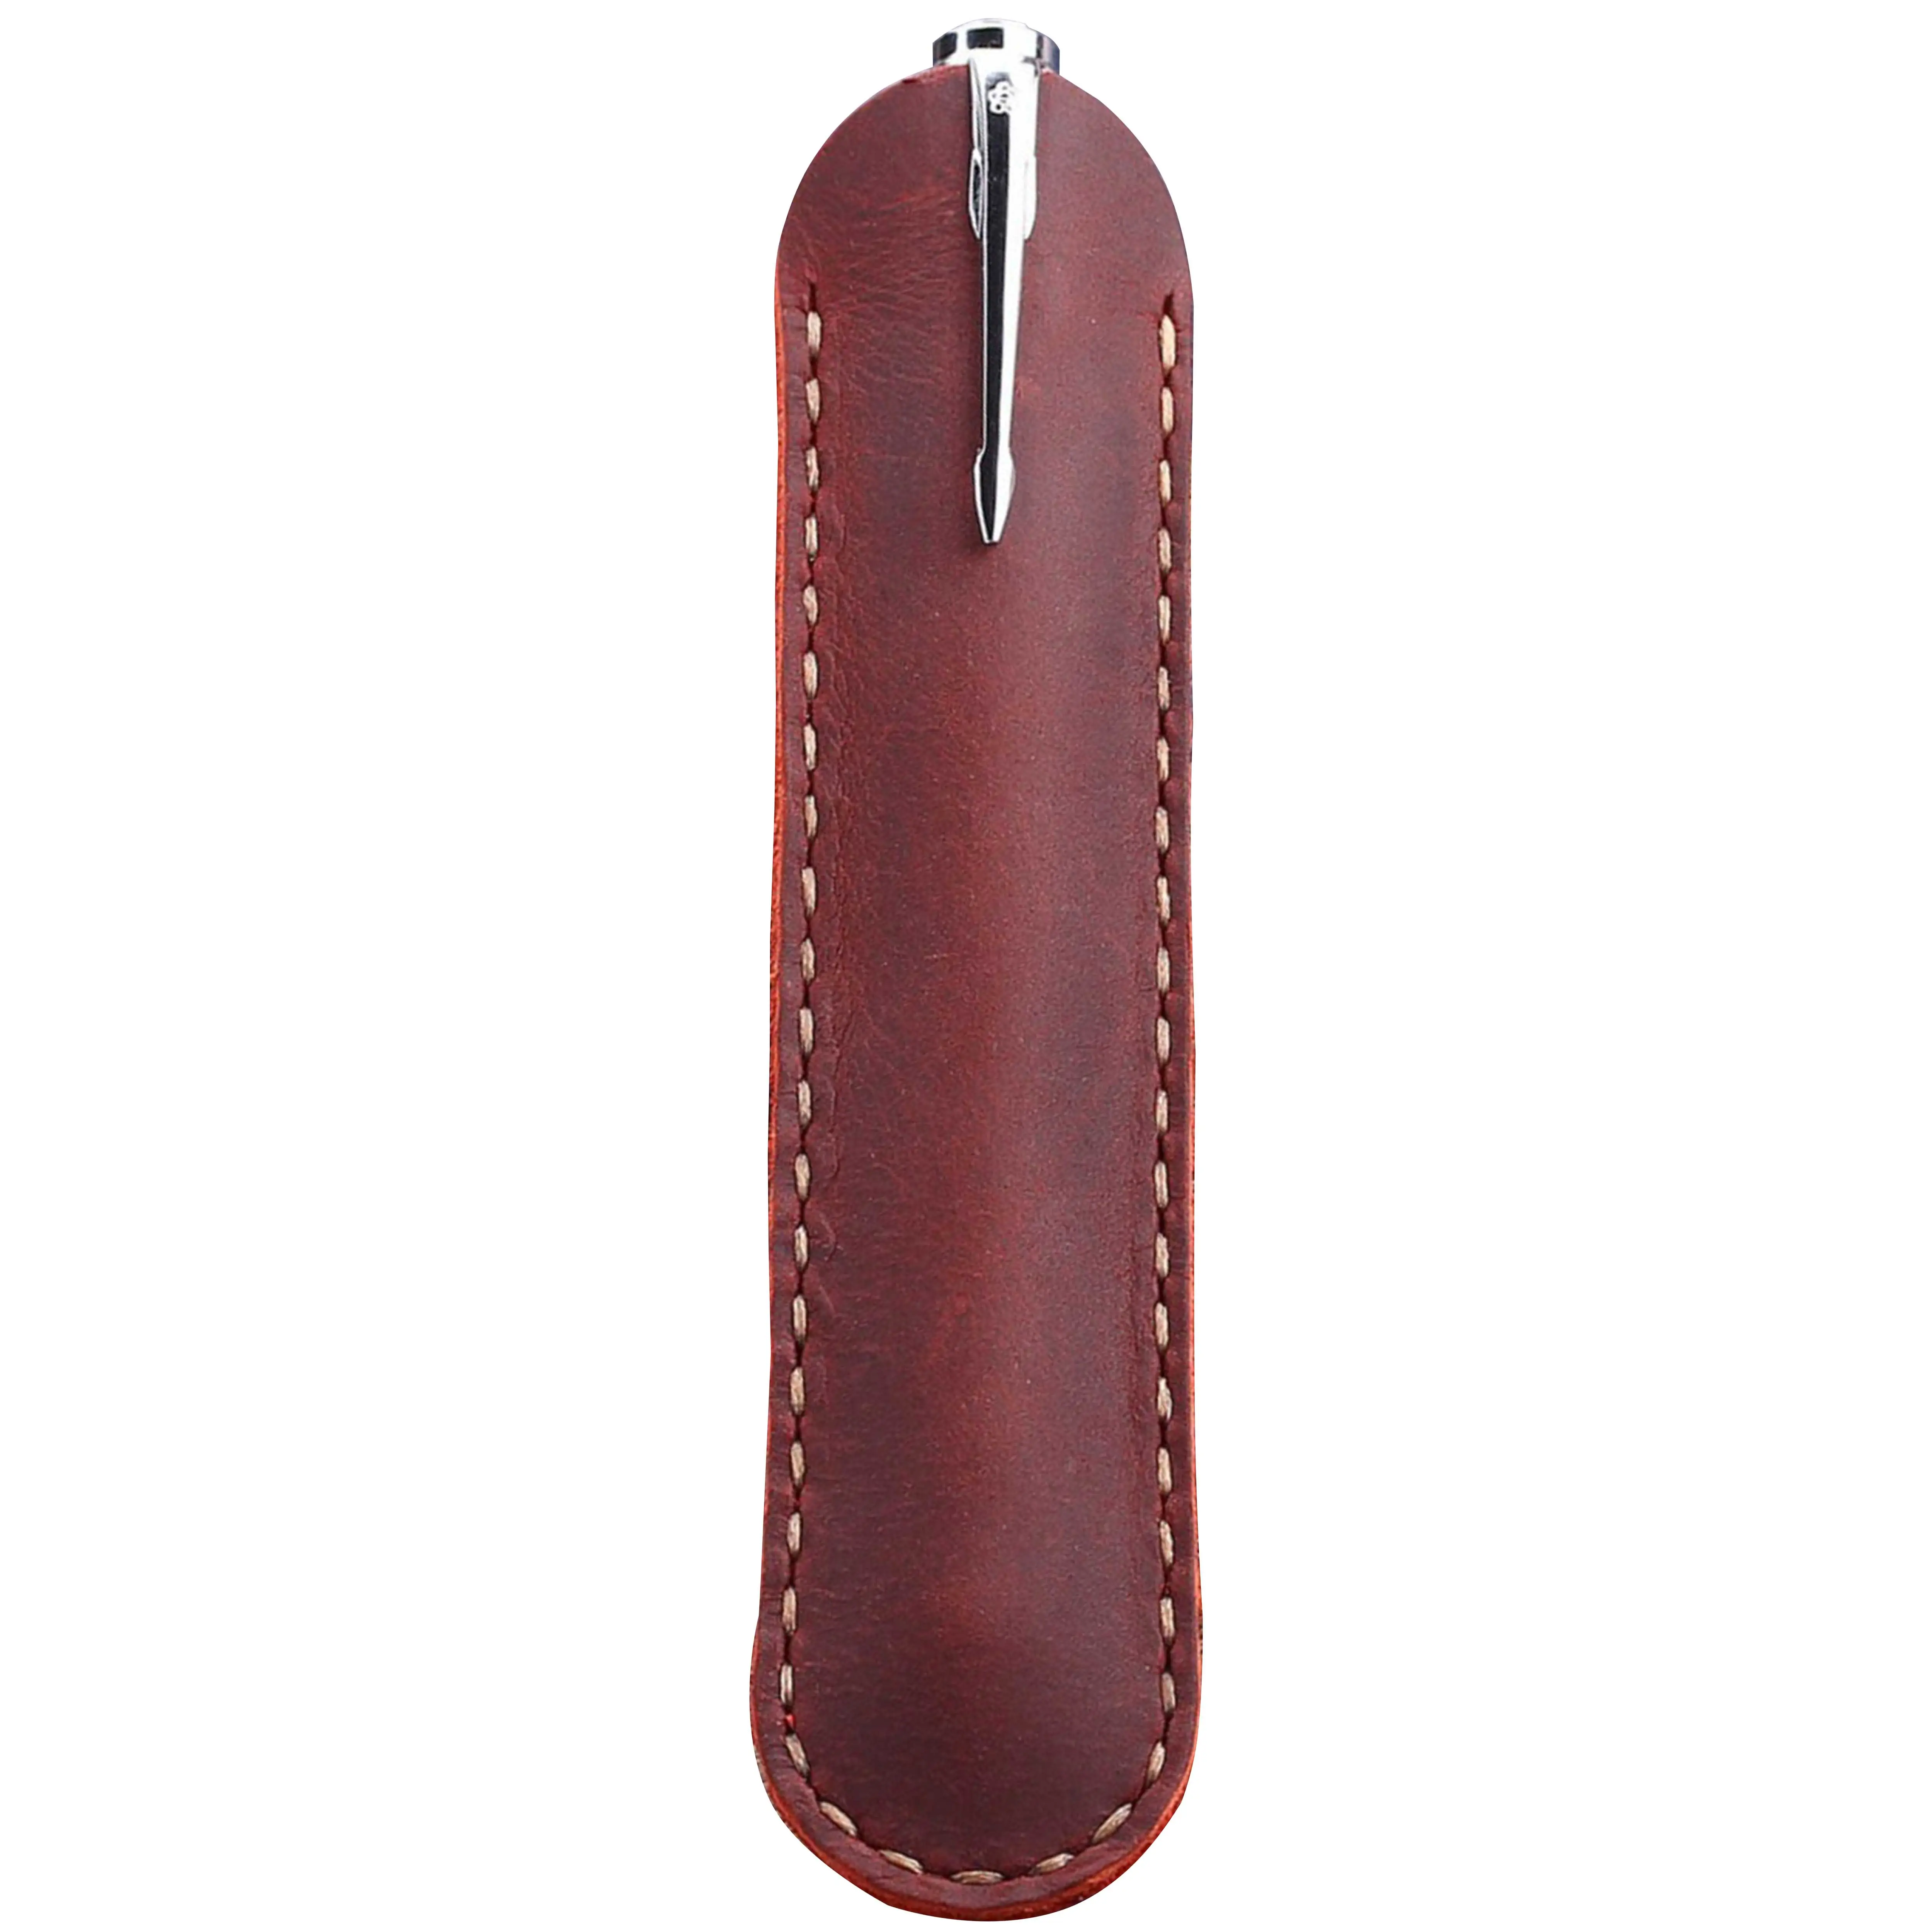 OEM Factory Made Rich Grain Leather 2 Pen Cover/Holster for office and gift use